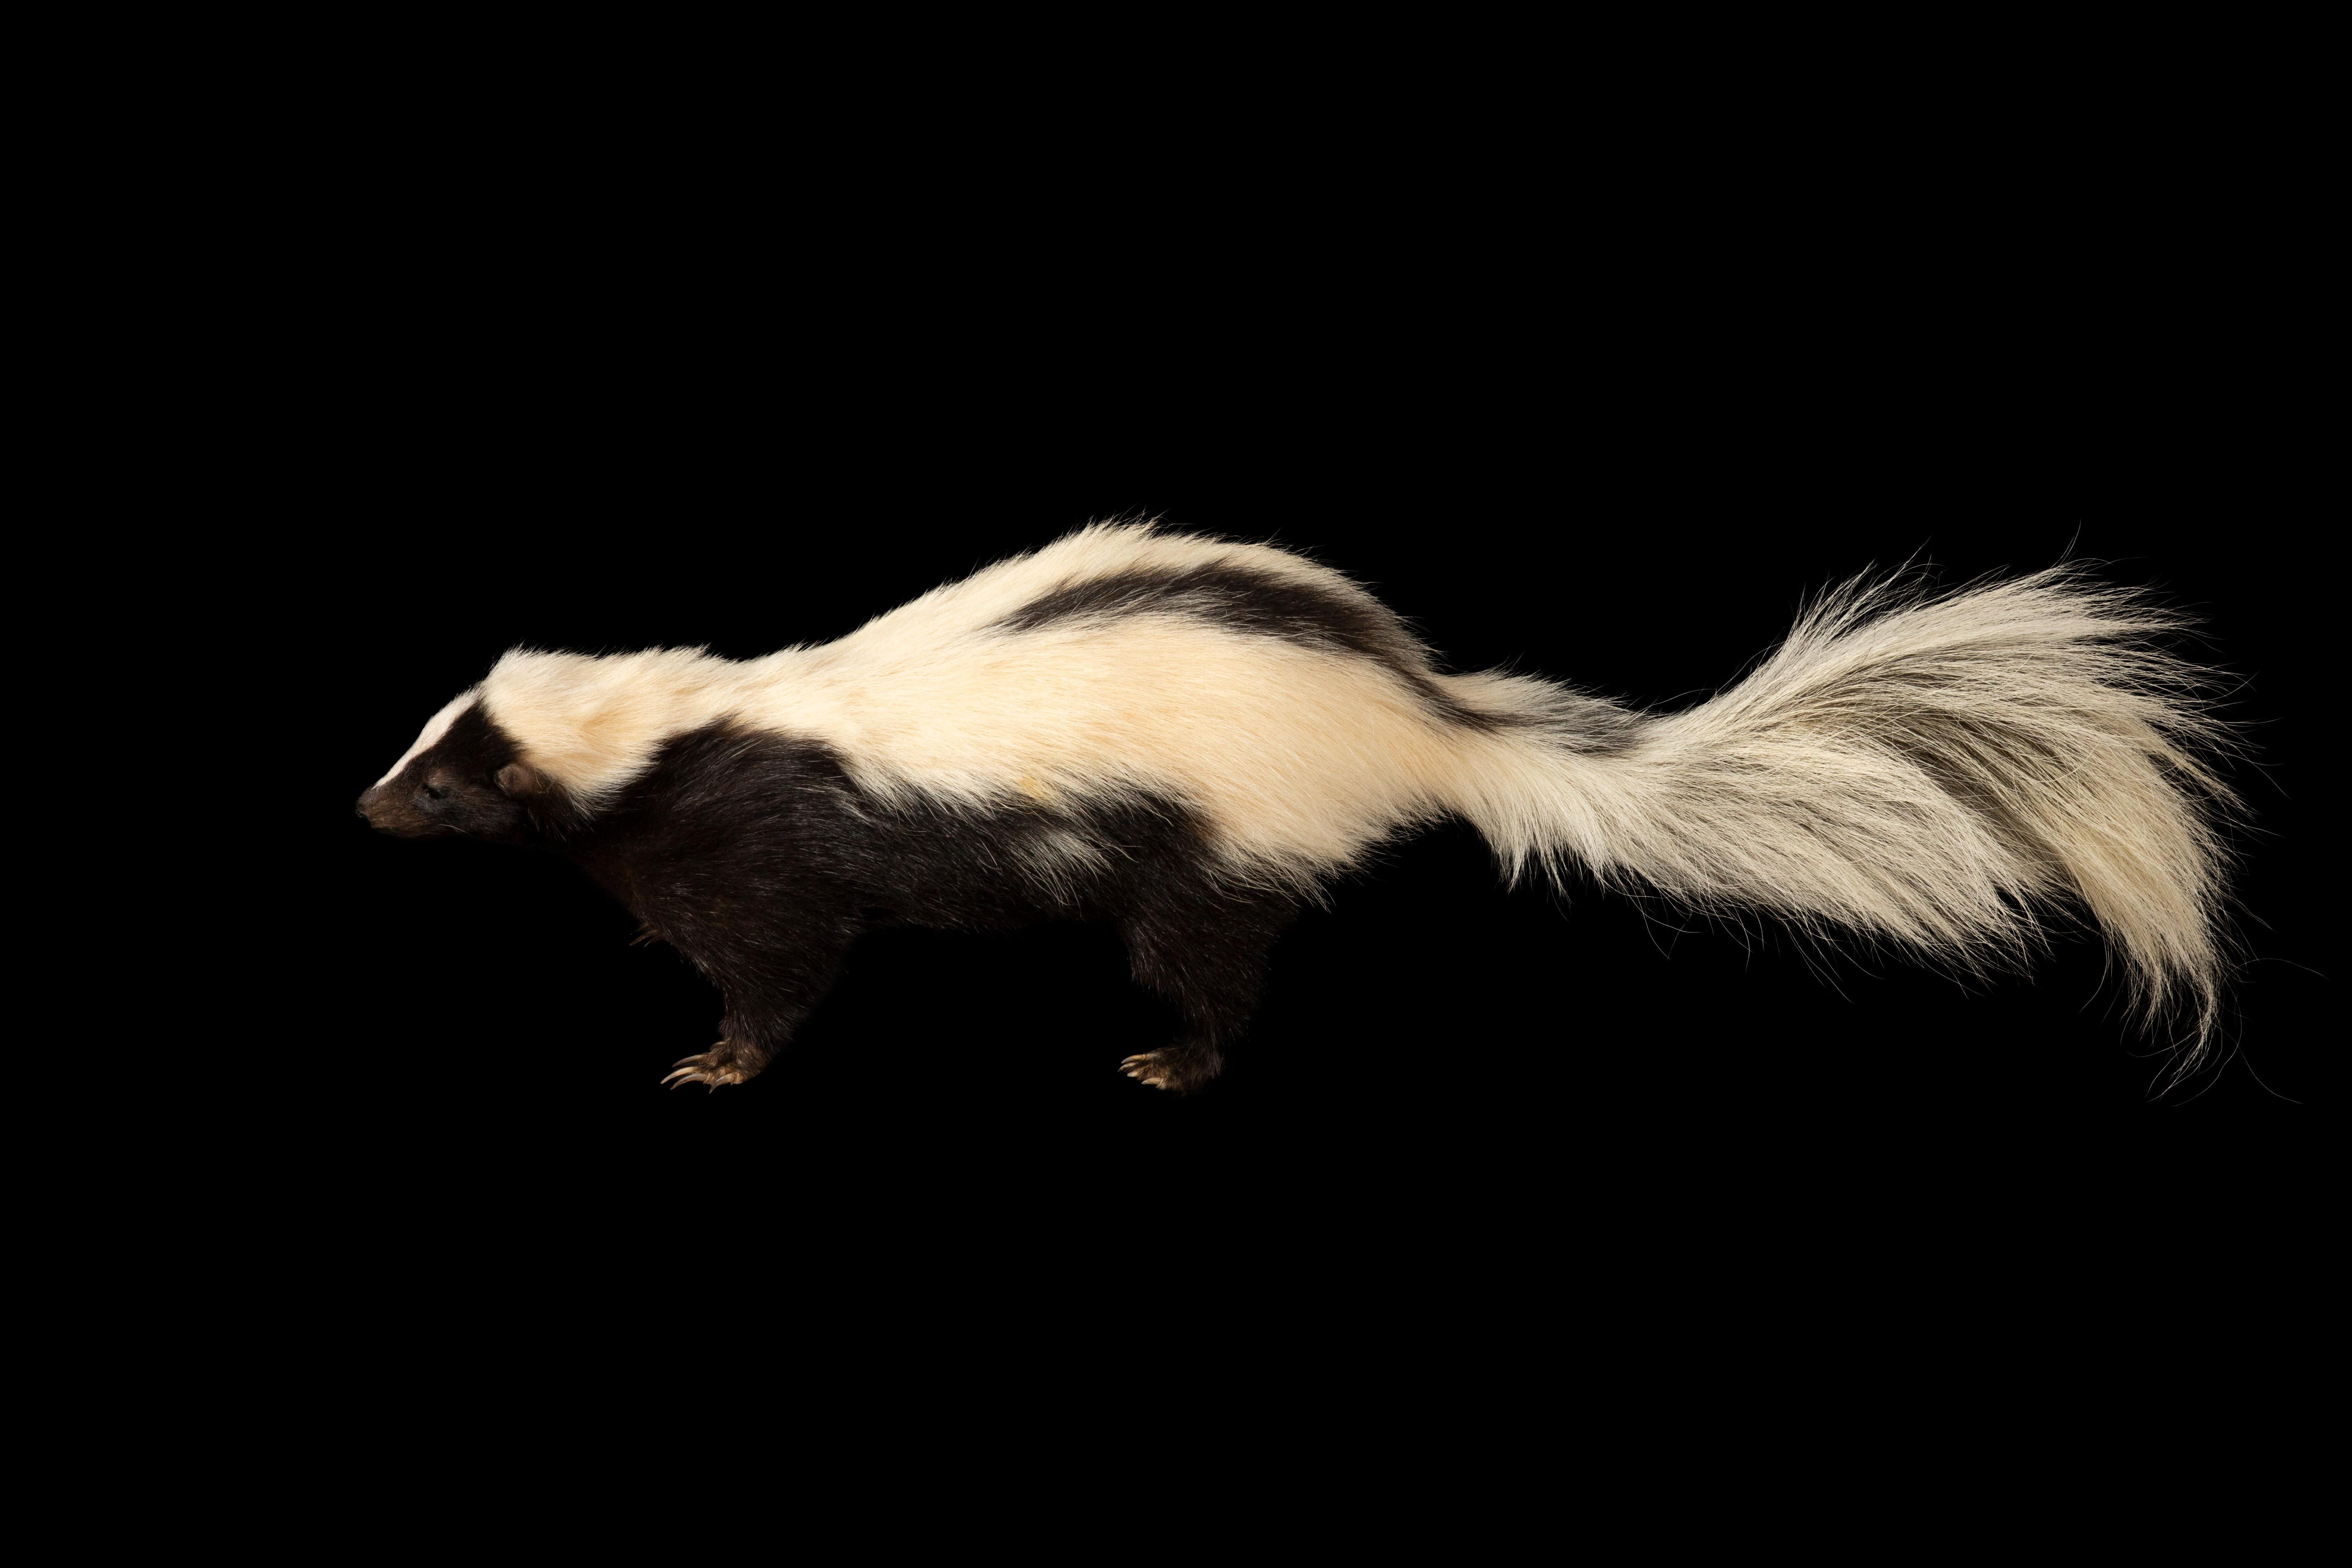 Meticulously crafted black and white taxidermy skunk, elegantly mounted to captivate the eye and heart alike. Immerse yourself in the essence of sophistication as you welcome your very own charismatic Pepe le Pew into your decor. This stunning piece